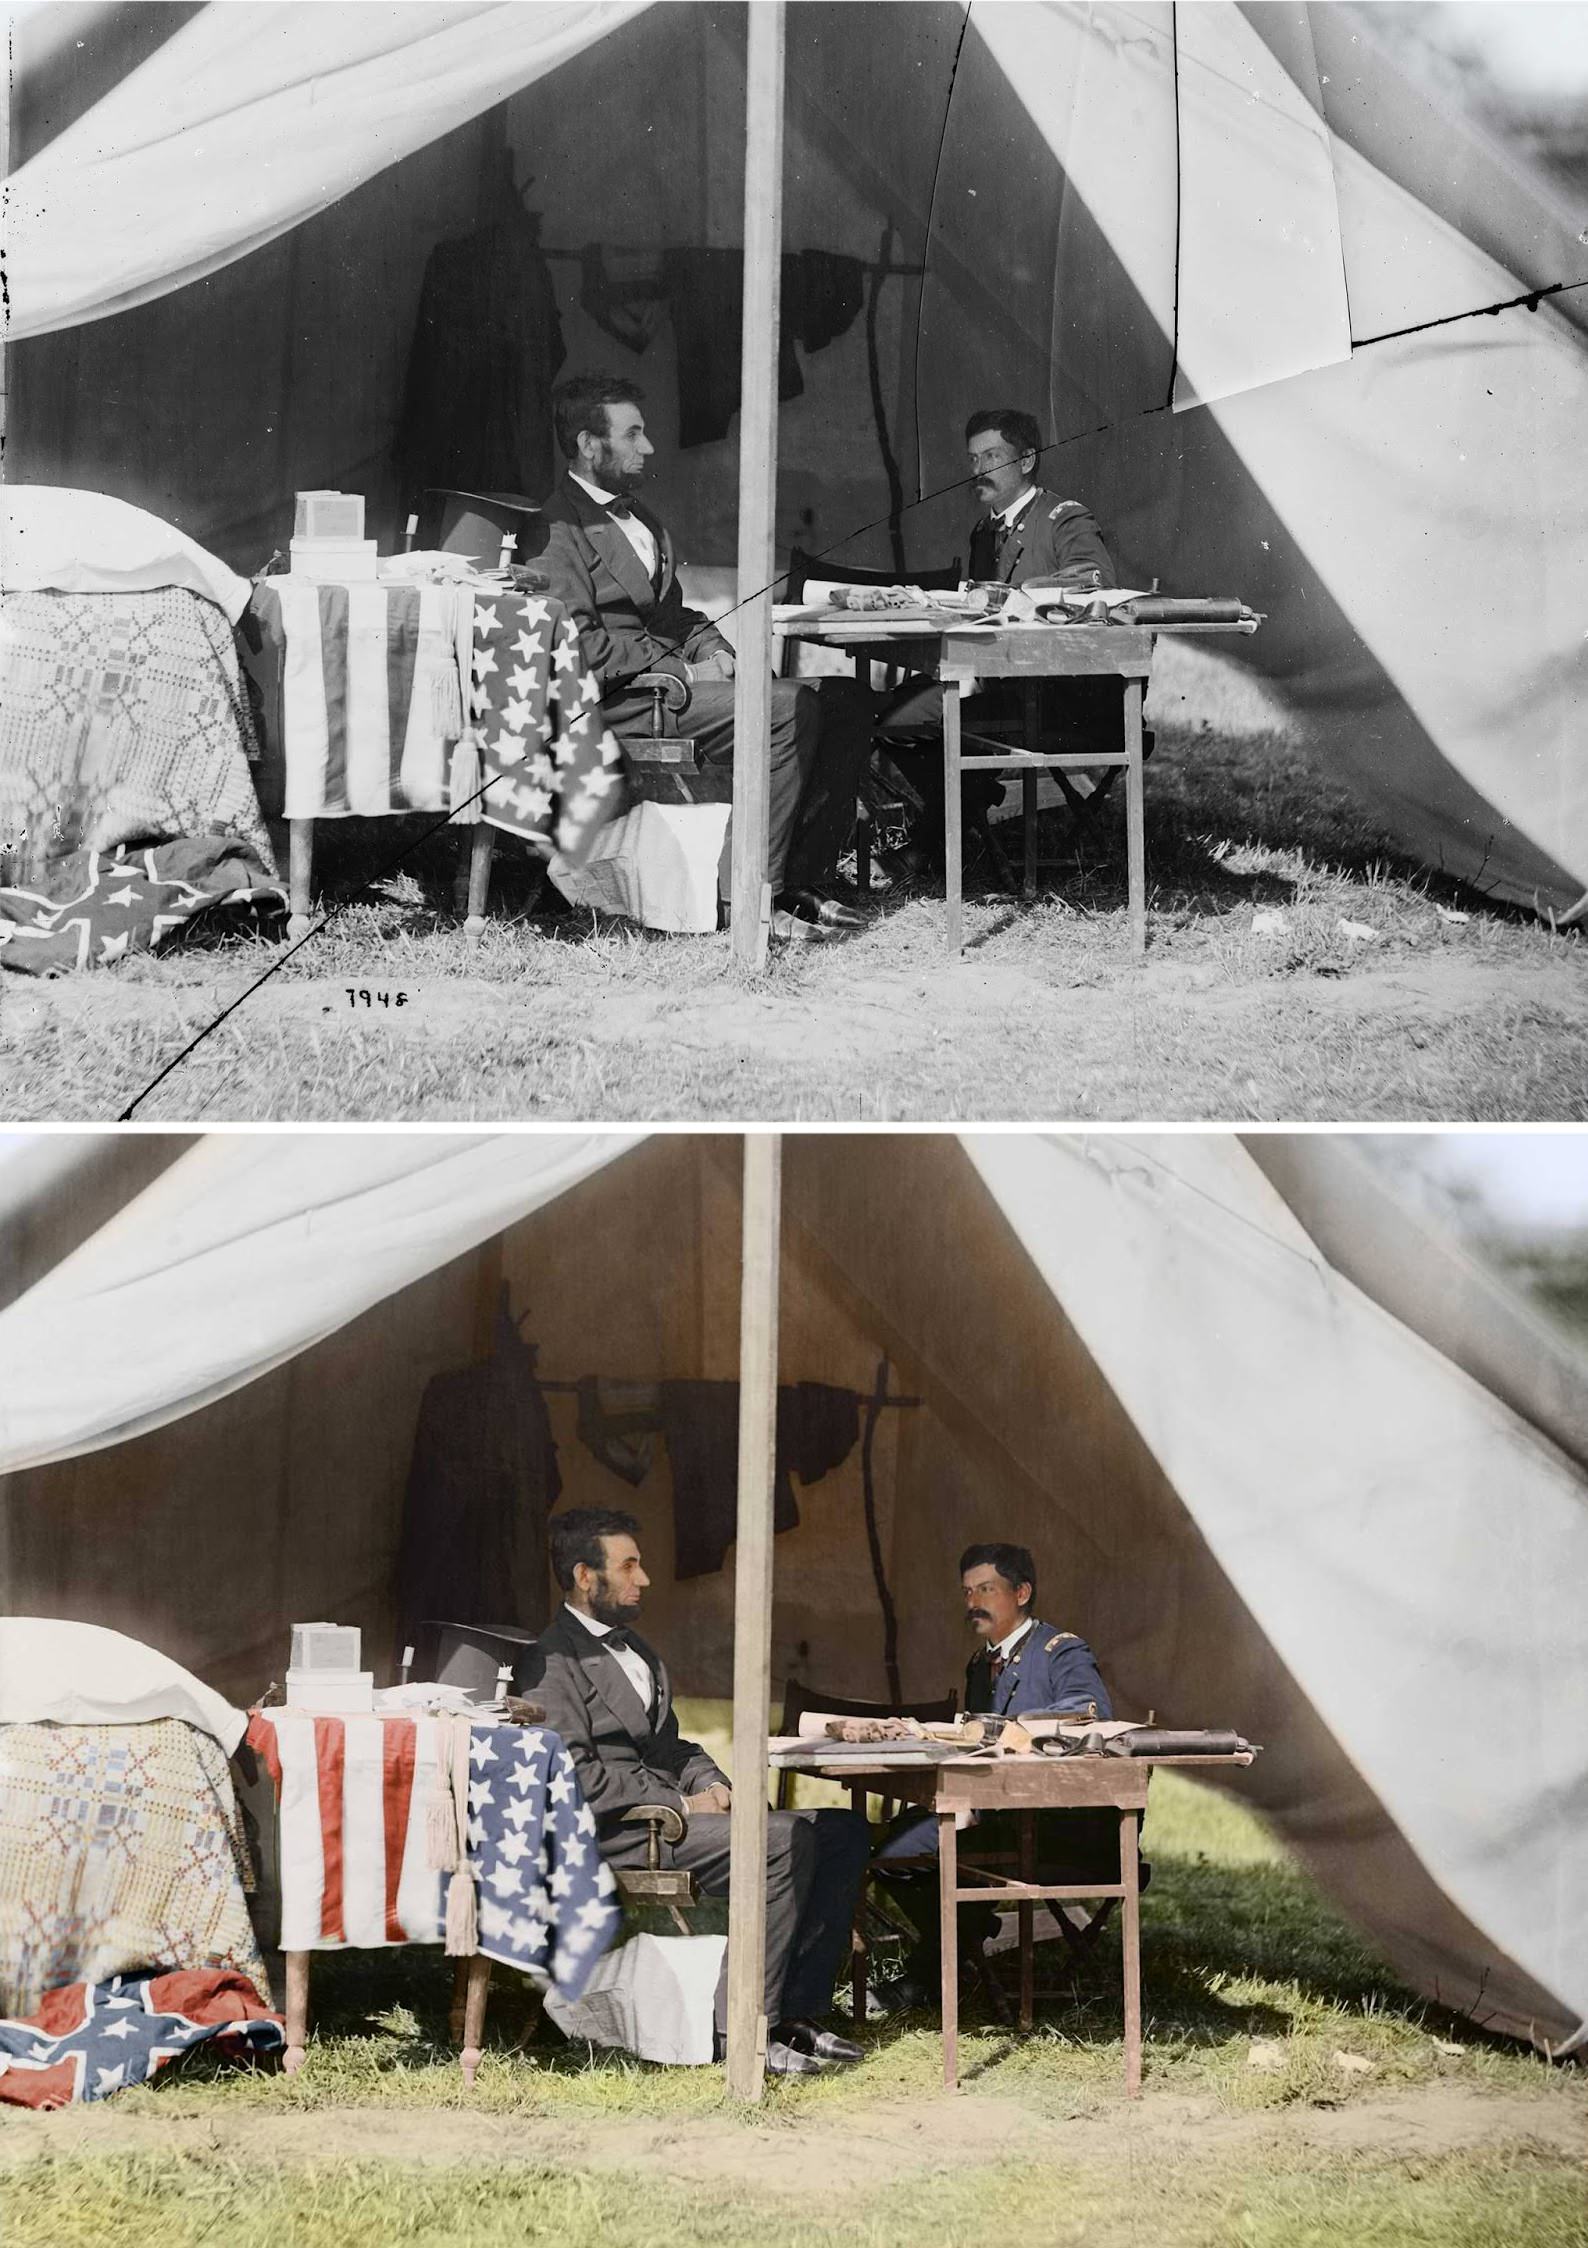 President Lincoln and Gen. George B. McClellan in the general’s tent, Antietam, Md., Sept. – Oct. 1862.